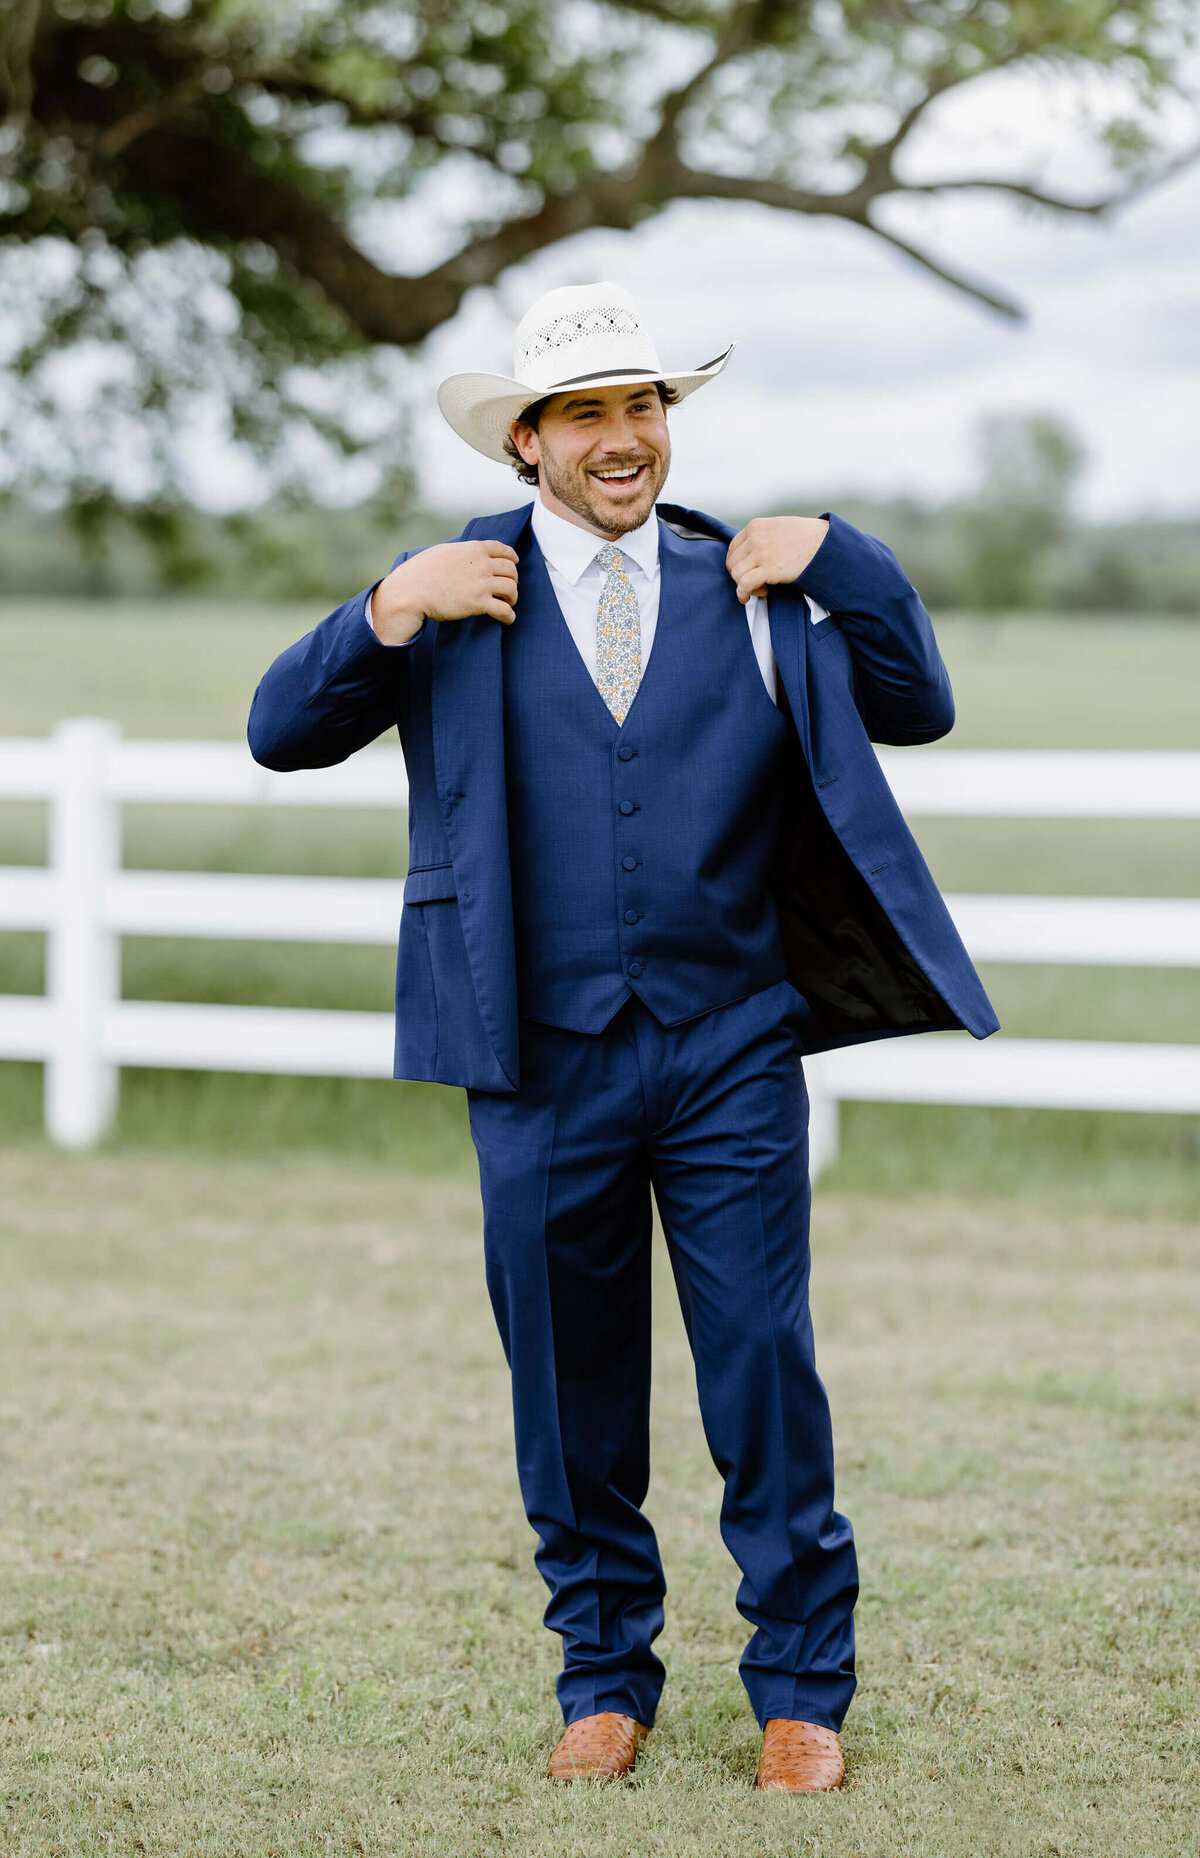 candid wedding day portrait of groom in navy suit and straw cowboy hat putting on suit coat